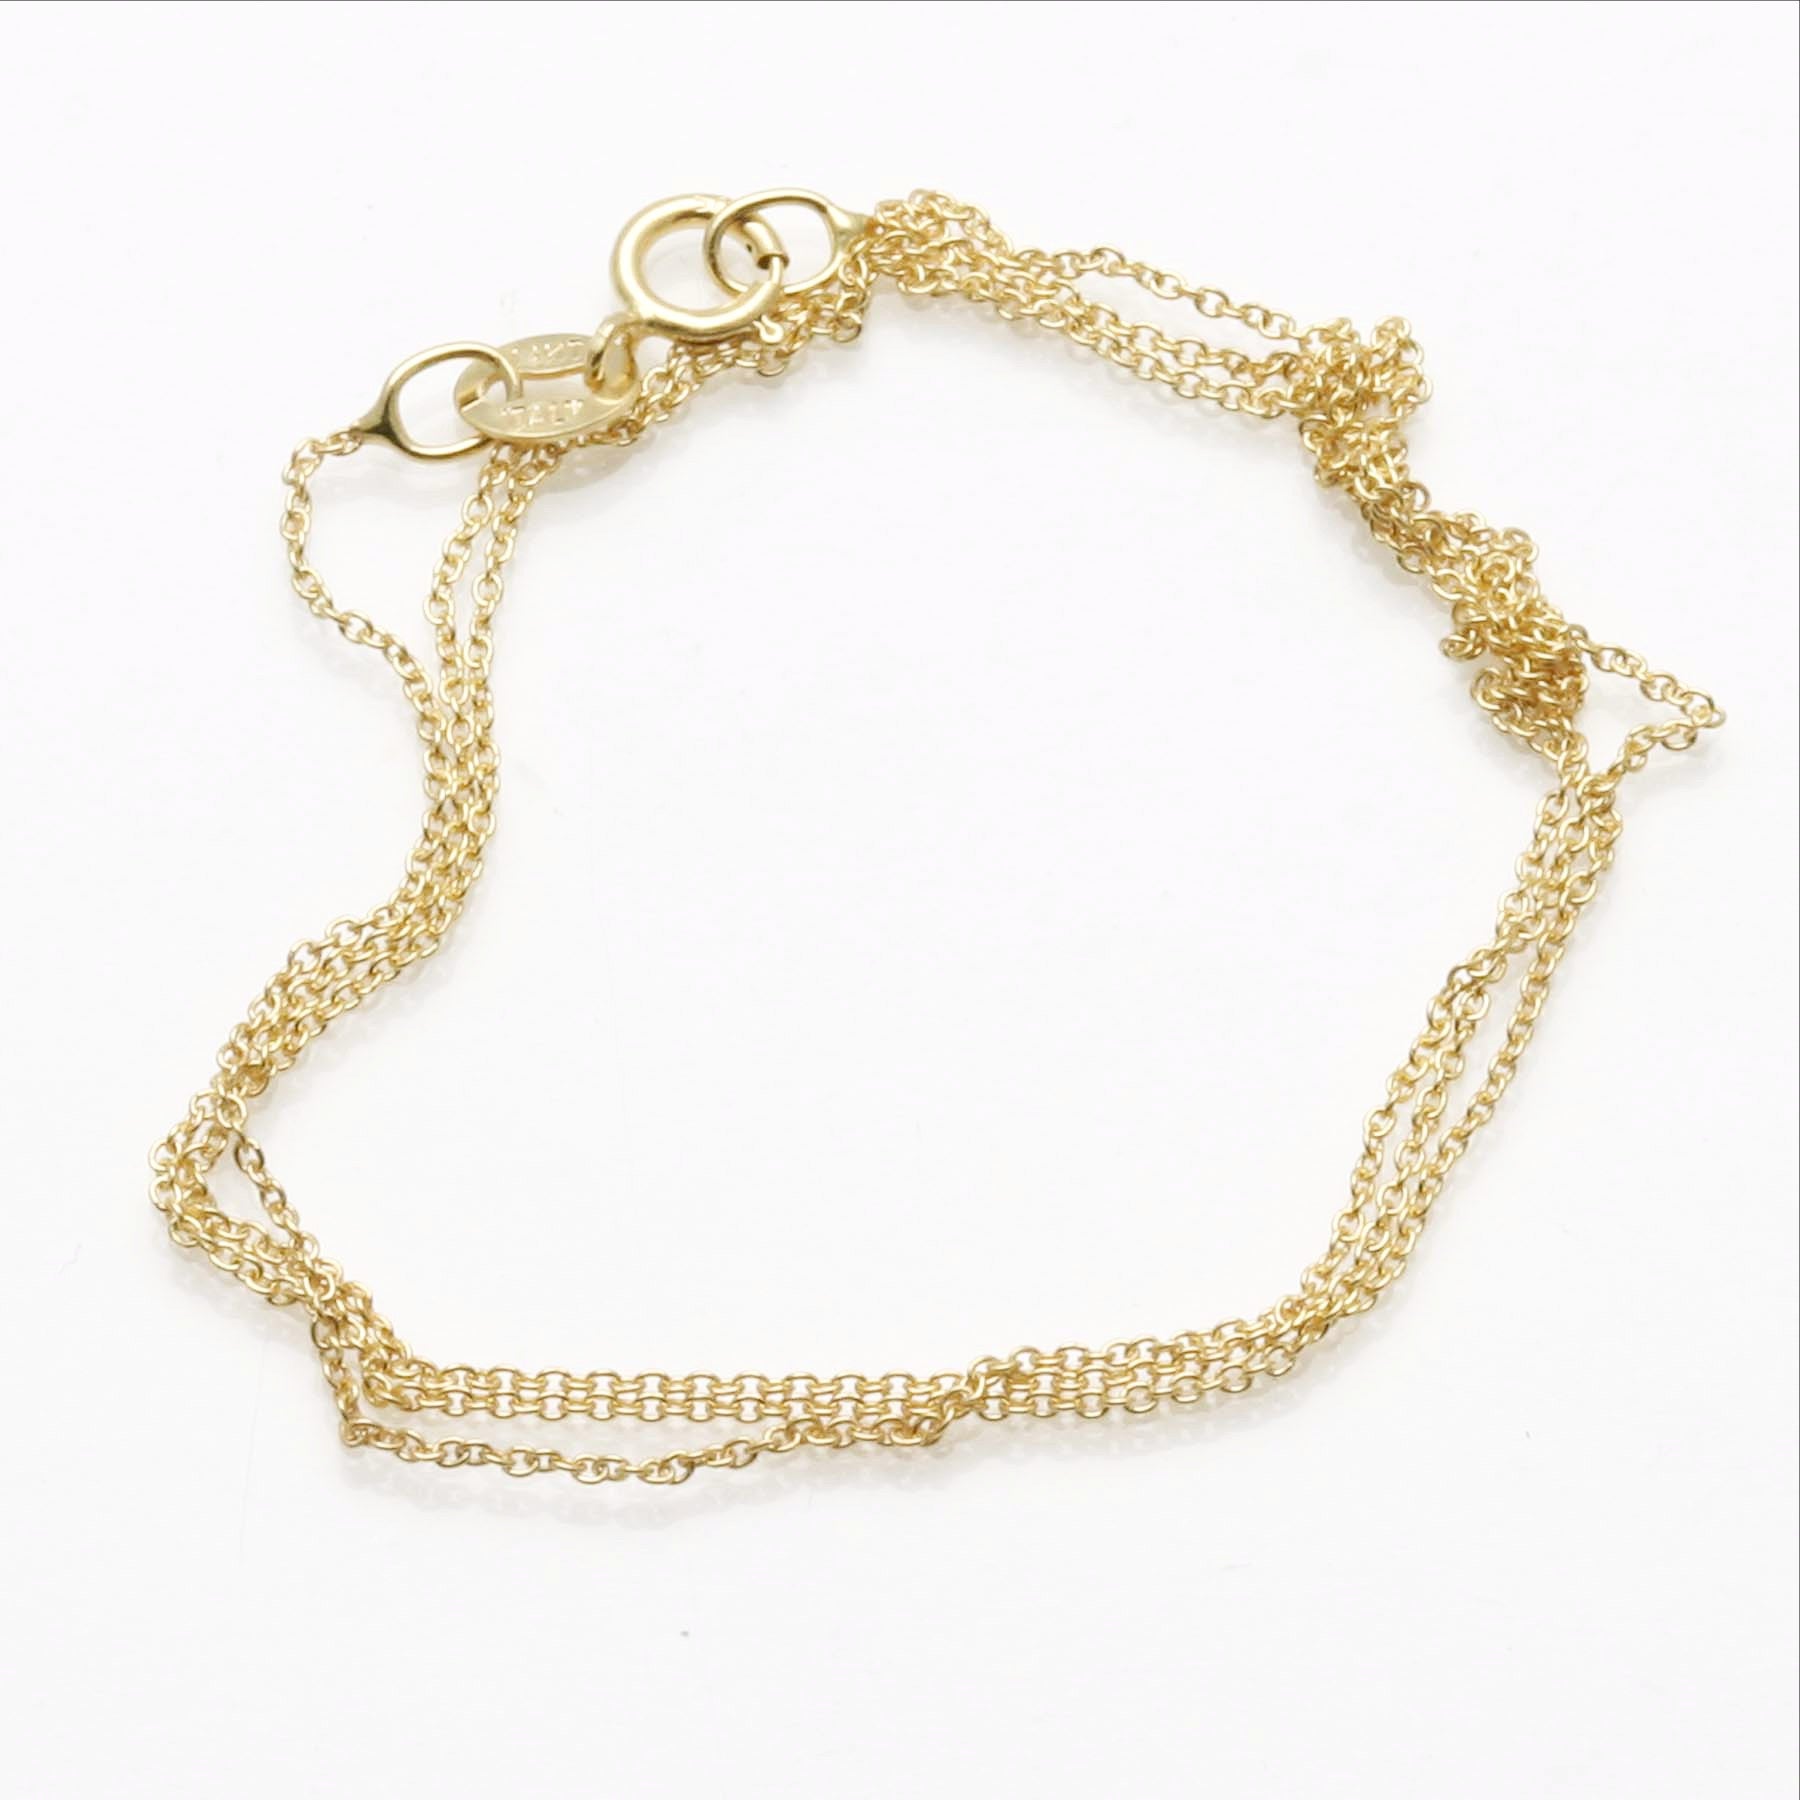 14k Yellow Gold Cable Link Chain Lightweight - JewelryJudaica